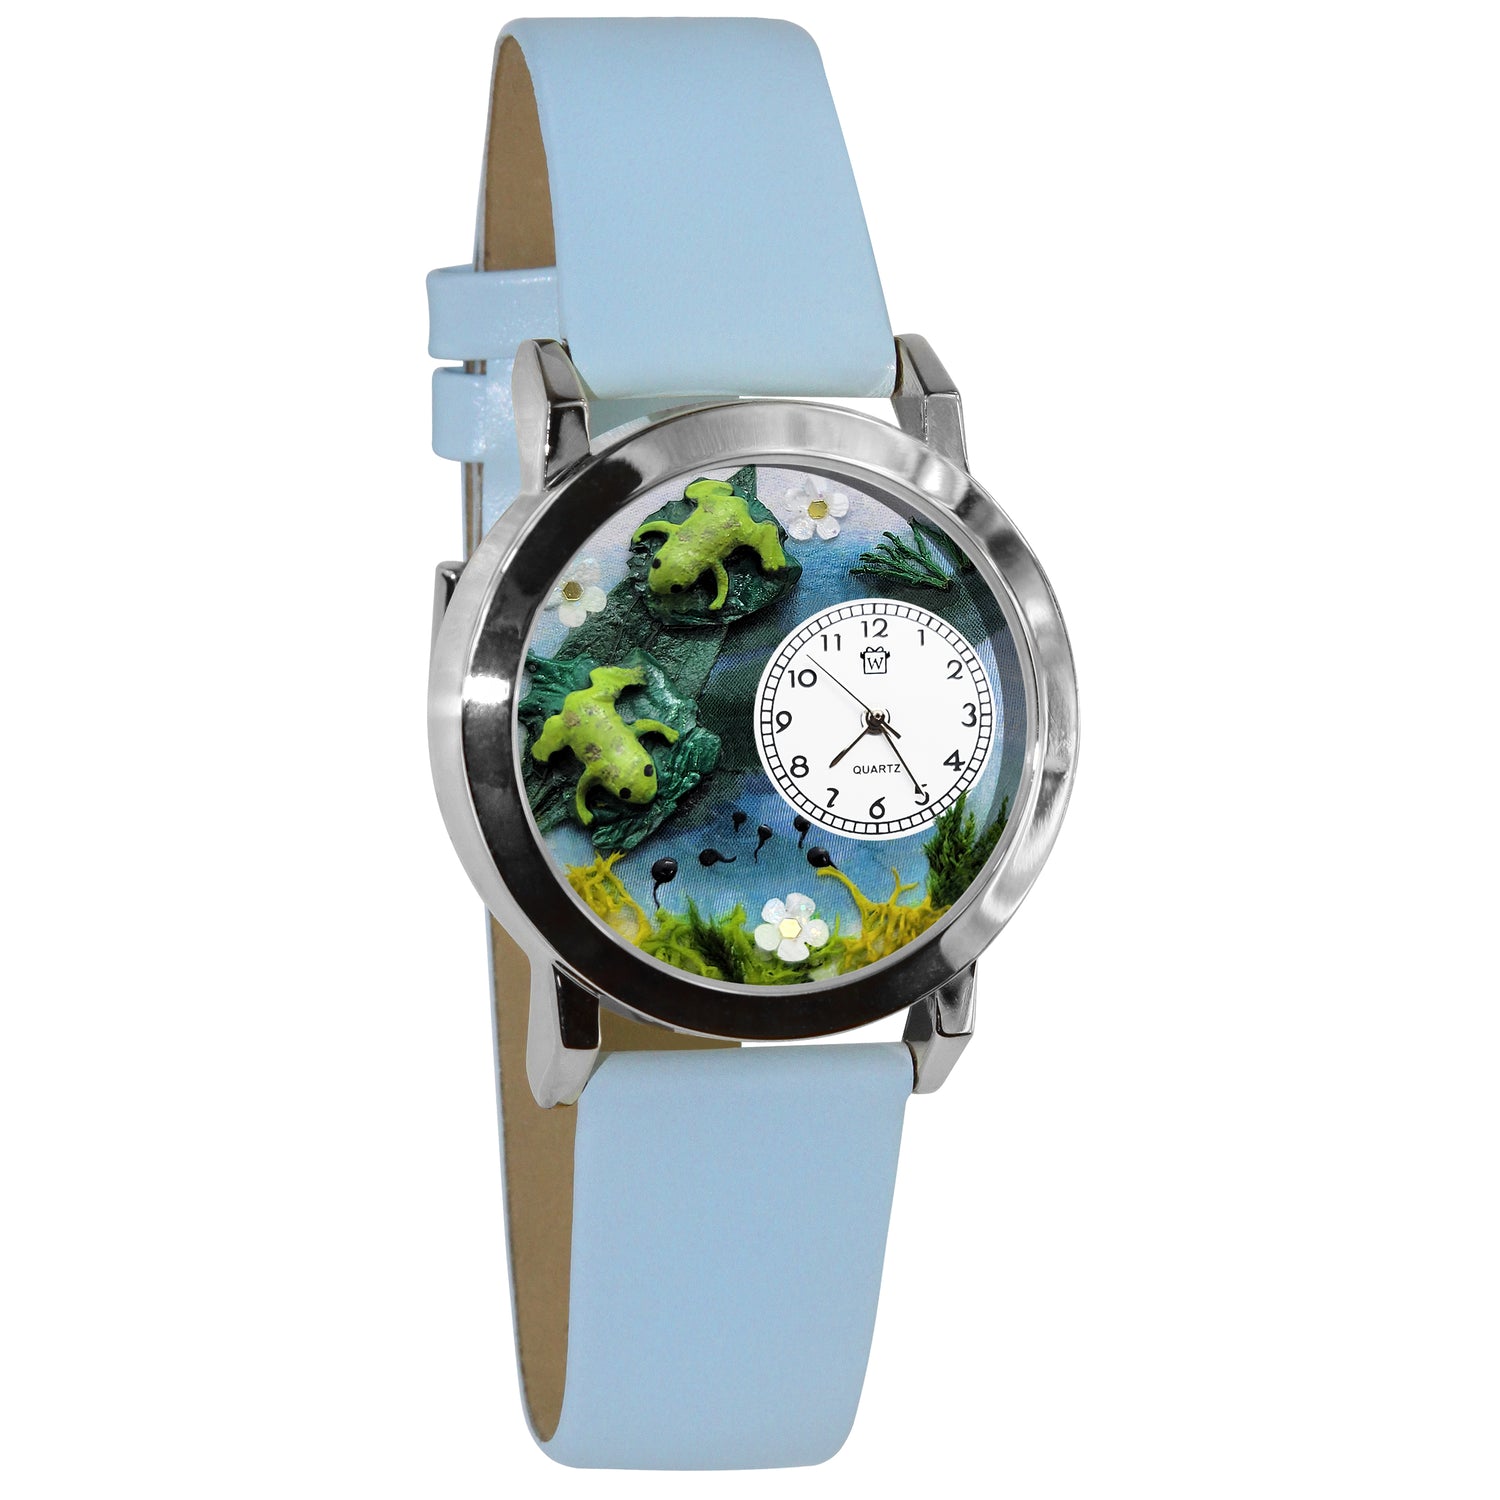 Whimsical Gifts | Frogs 3D Watch Small Style | Handmade in USA | Animal Lover | Outdoor & Garden | Novelty Unique Fun Miniatures Gift | Silver Finish Light Blue Leather Watch Band